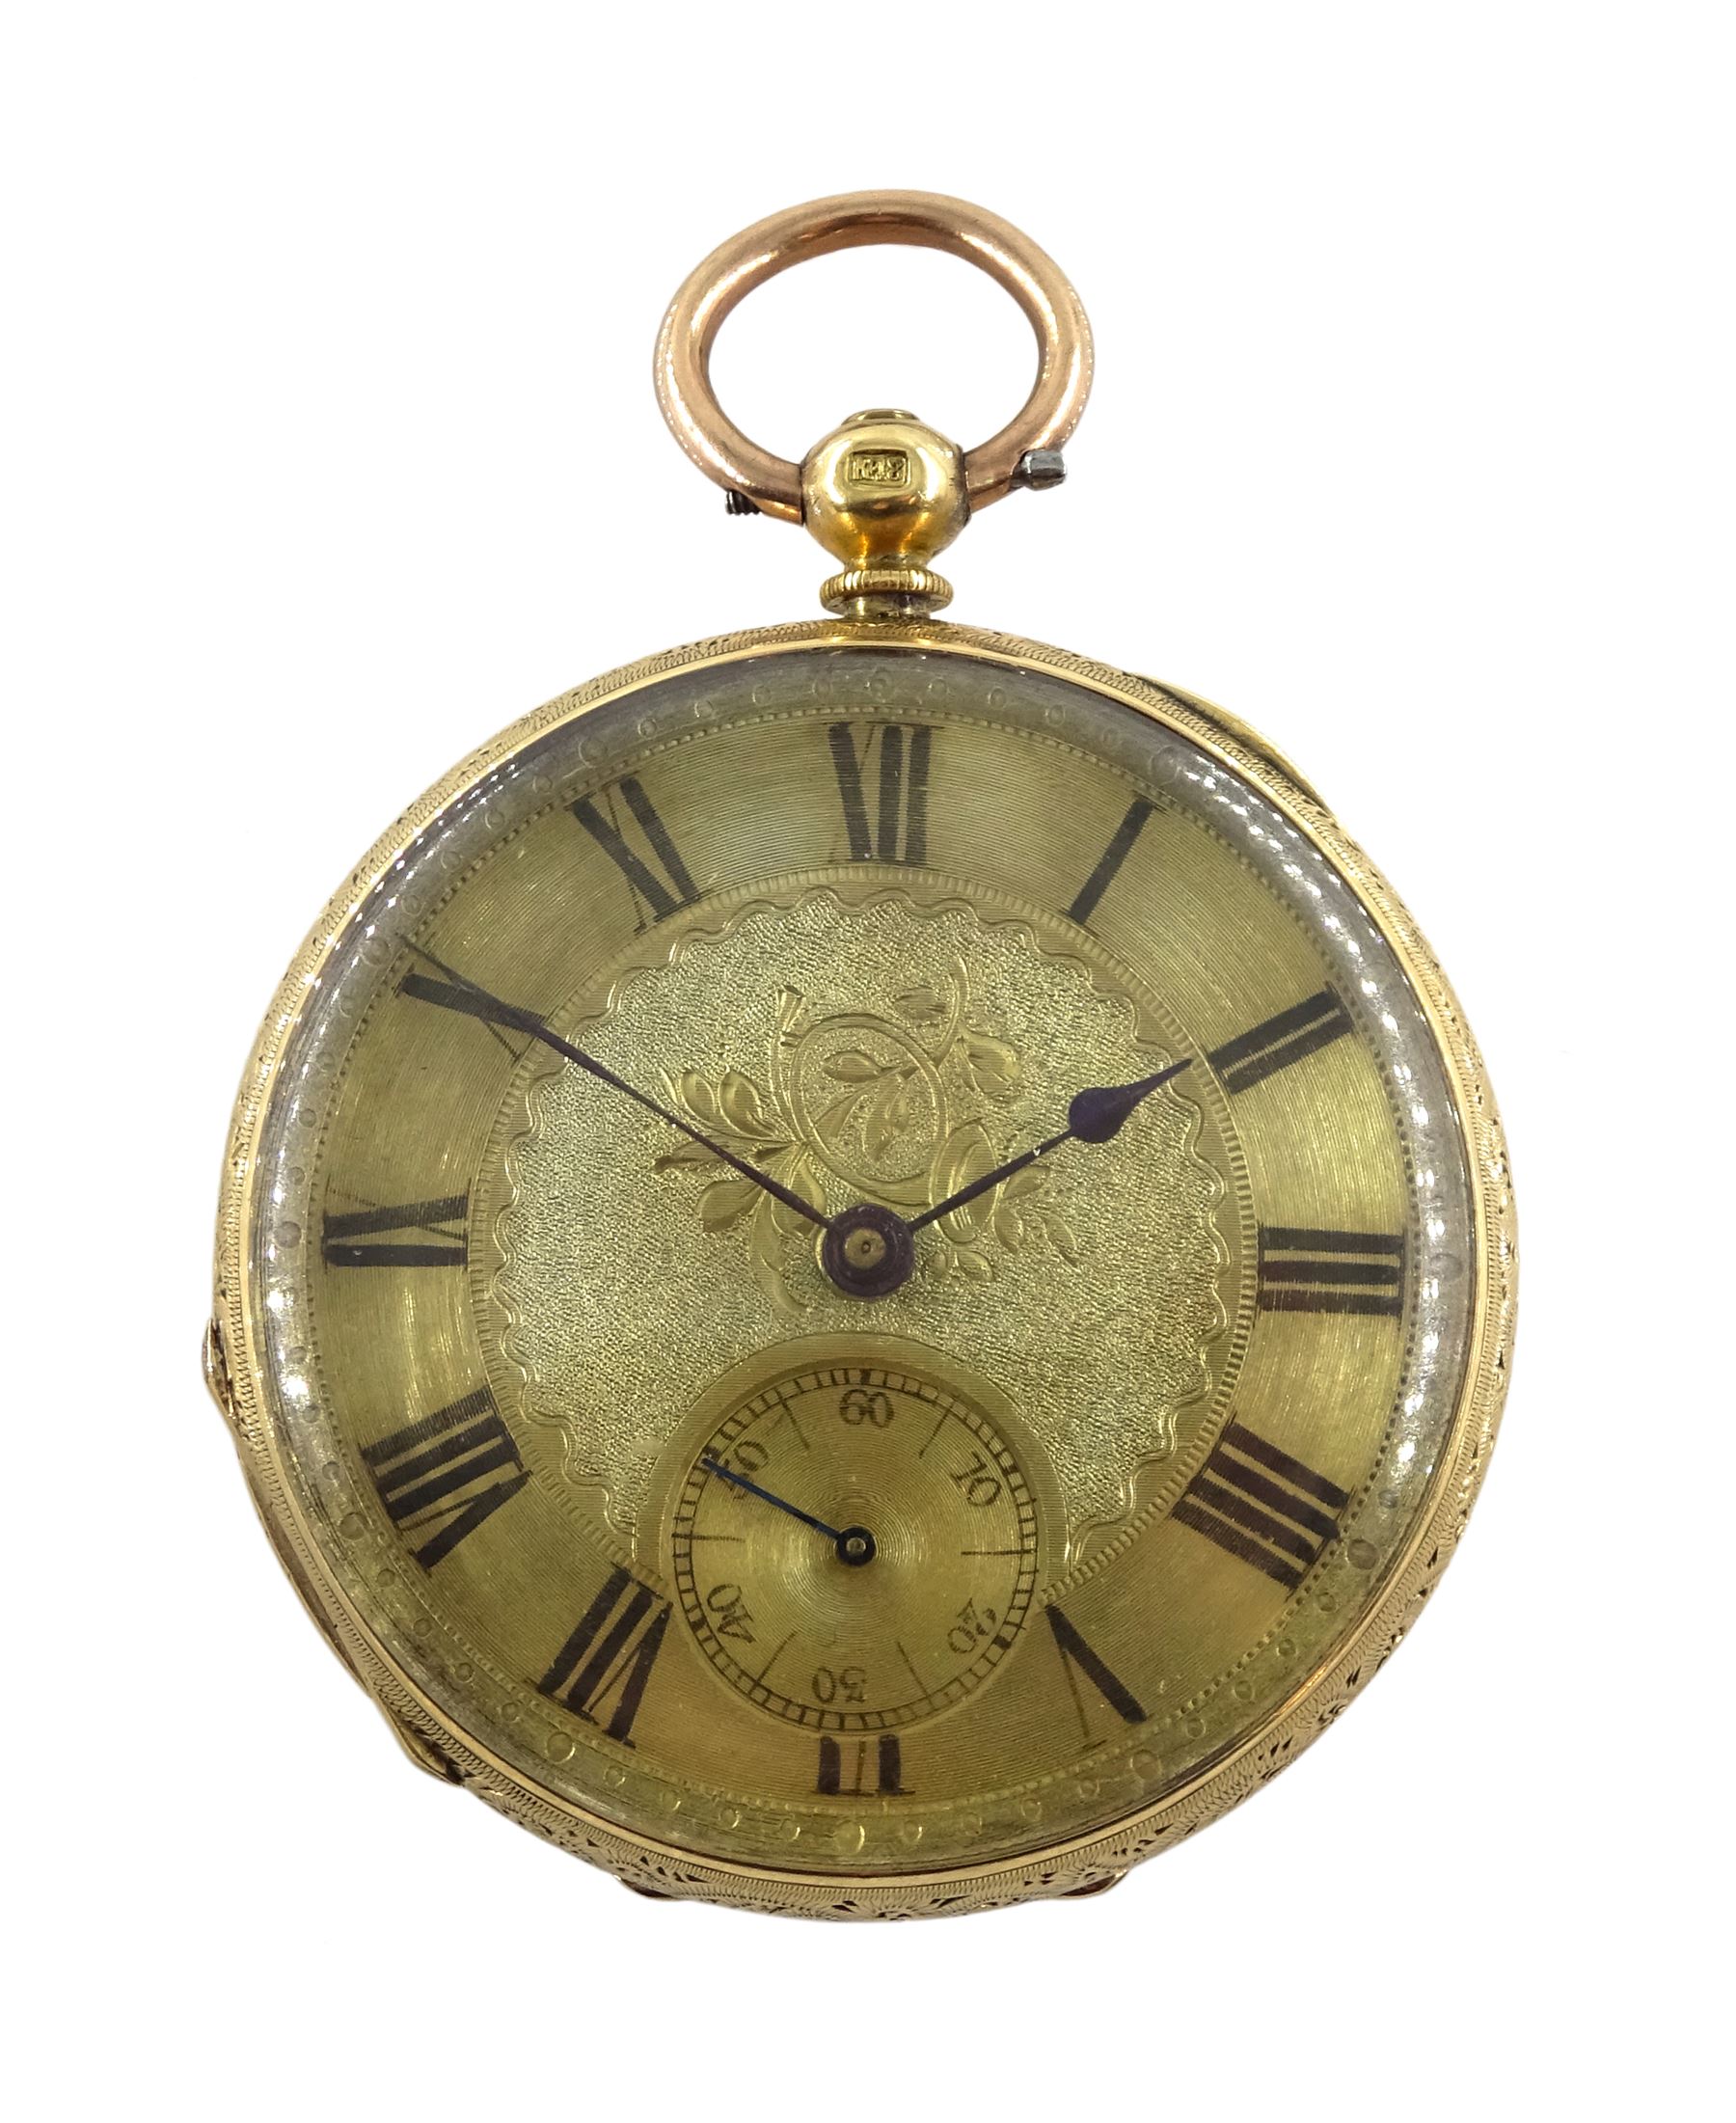 Swiss 18ct gold open face key wound lever ladies pocket watch, No. 21040, gilt dial with Roman numer